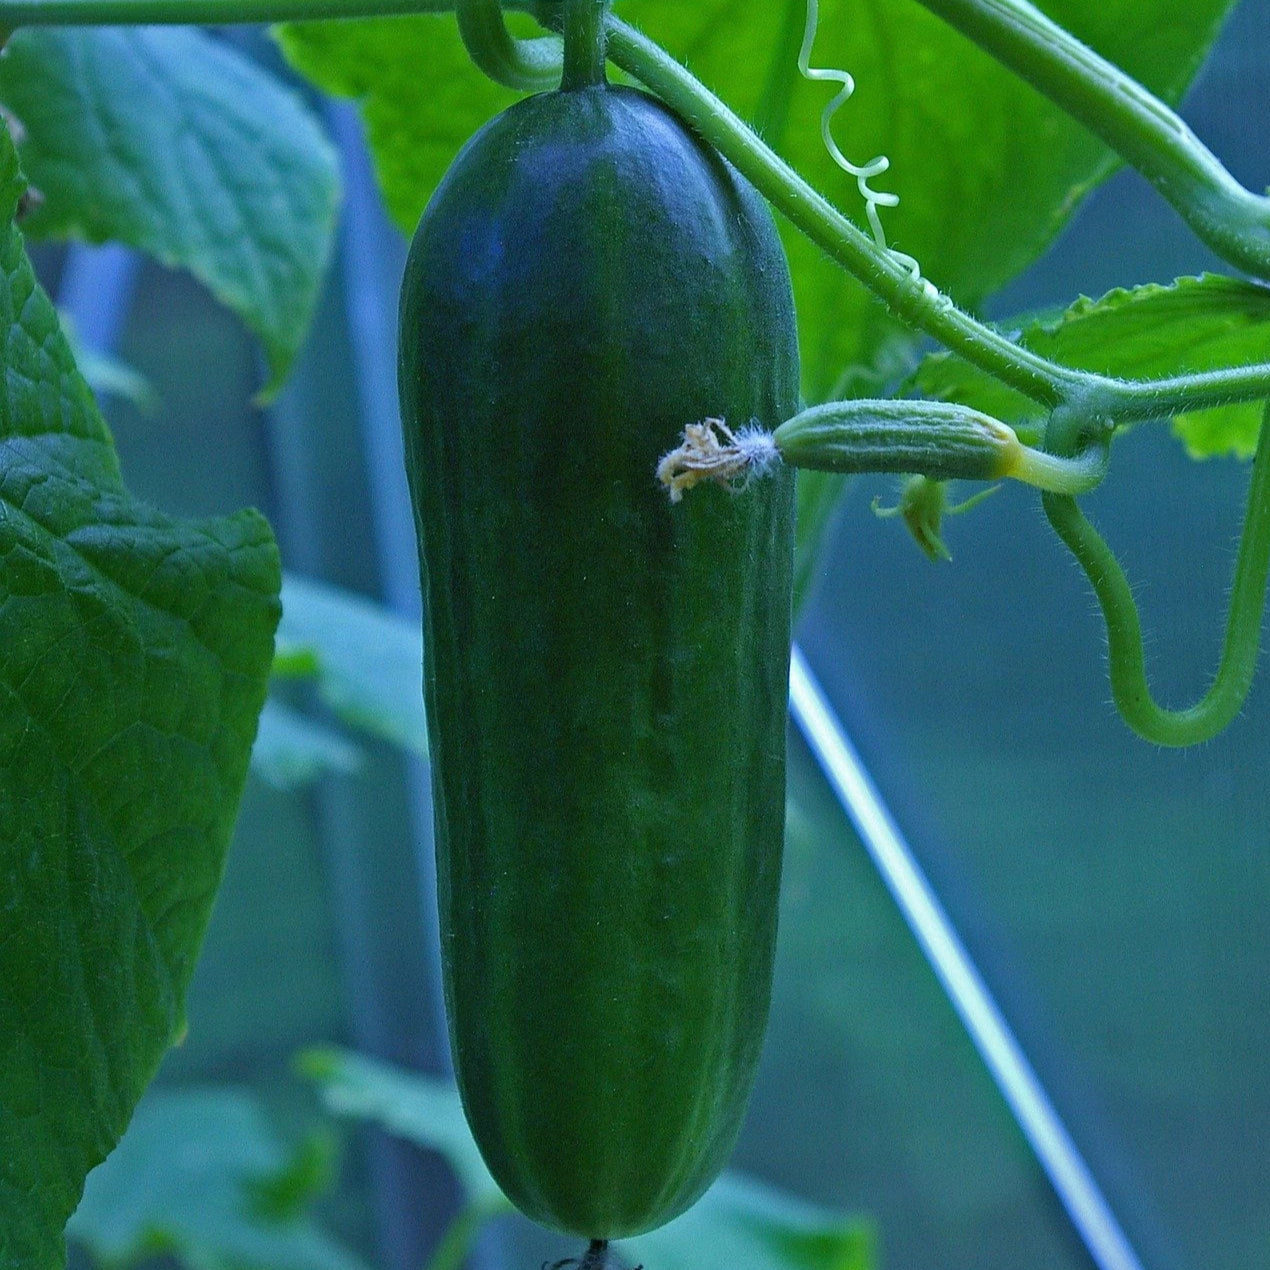 Muncher Cucumber Seeds for Planting 3 Packets